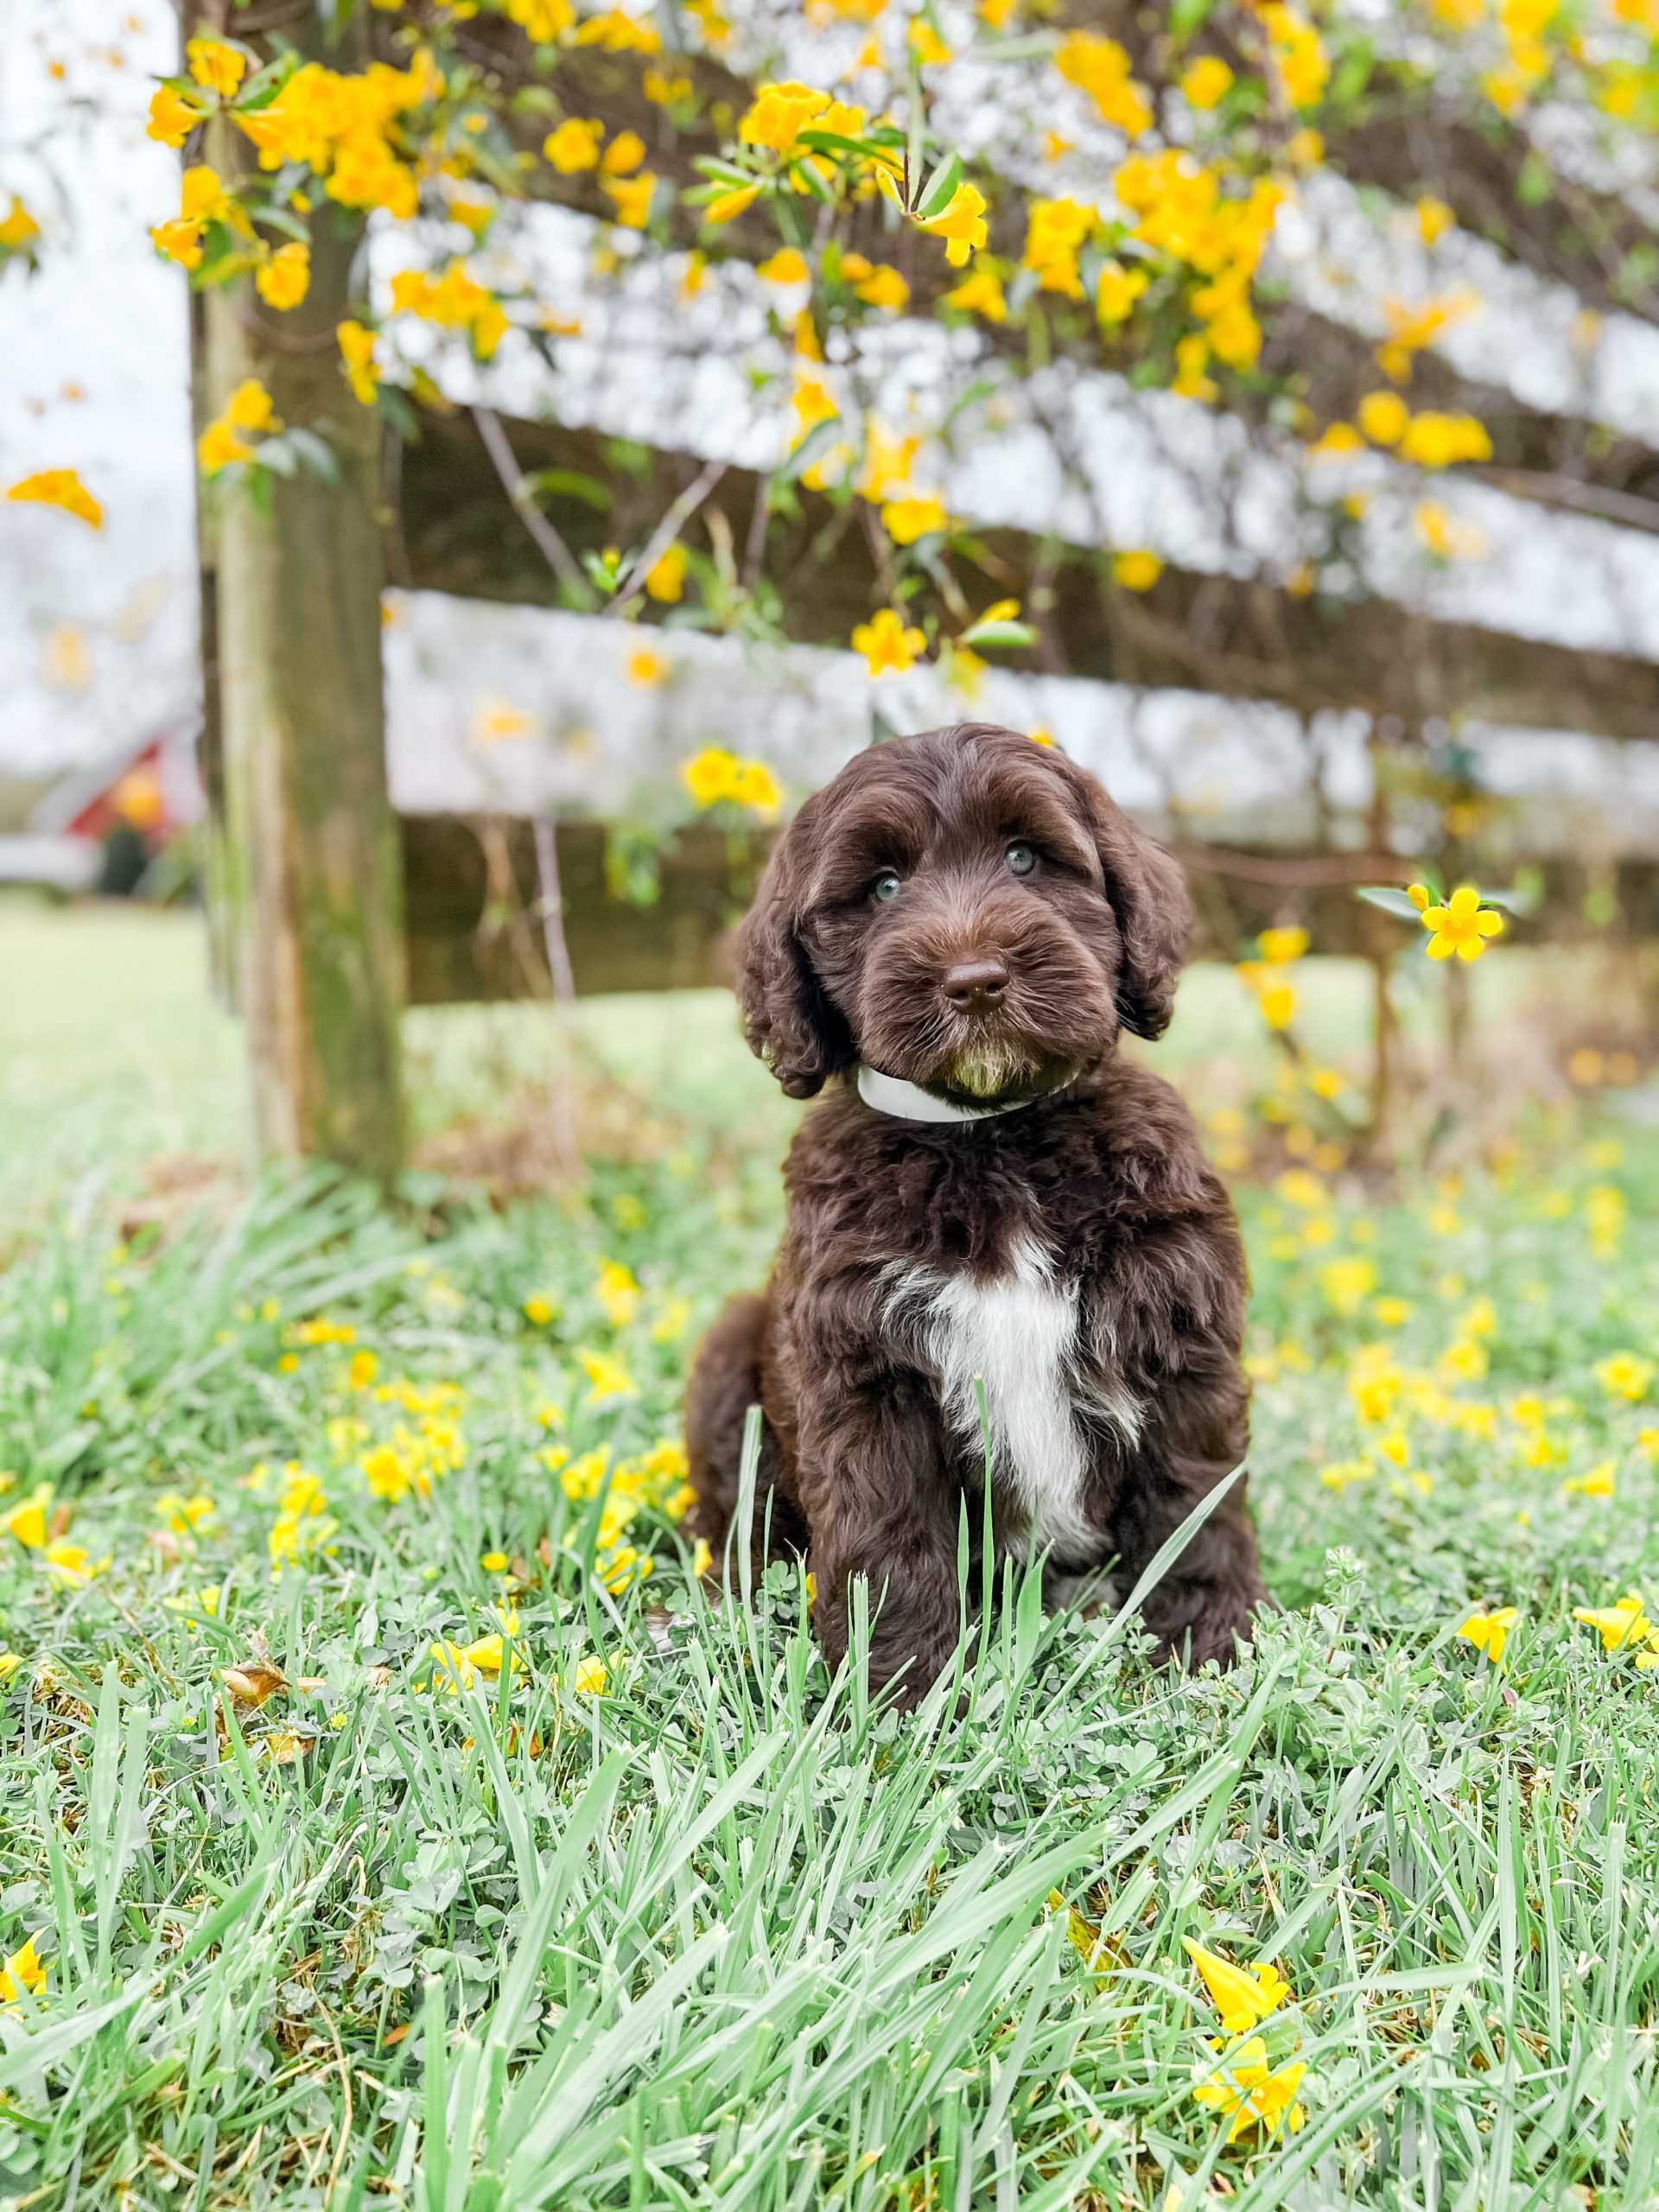 a chocolate teddy bear twoodle with white marking on his chest in the grass with flowers